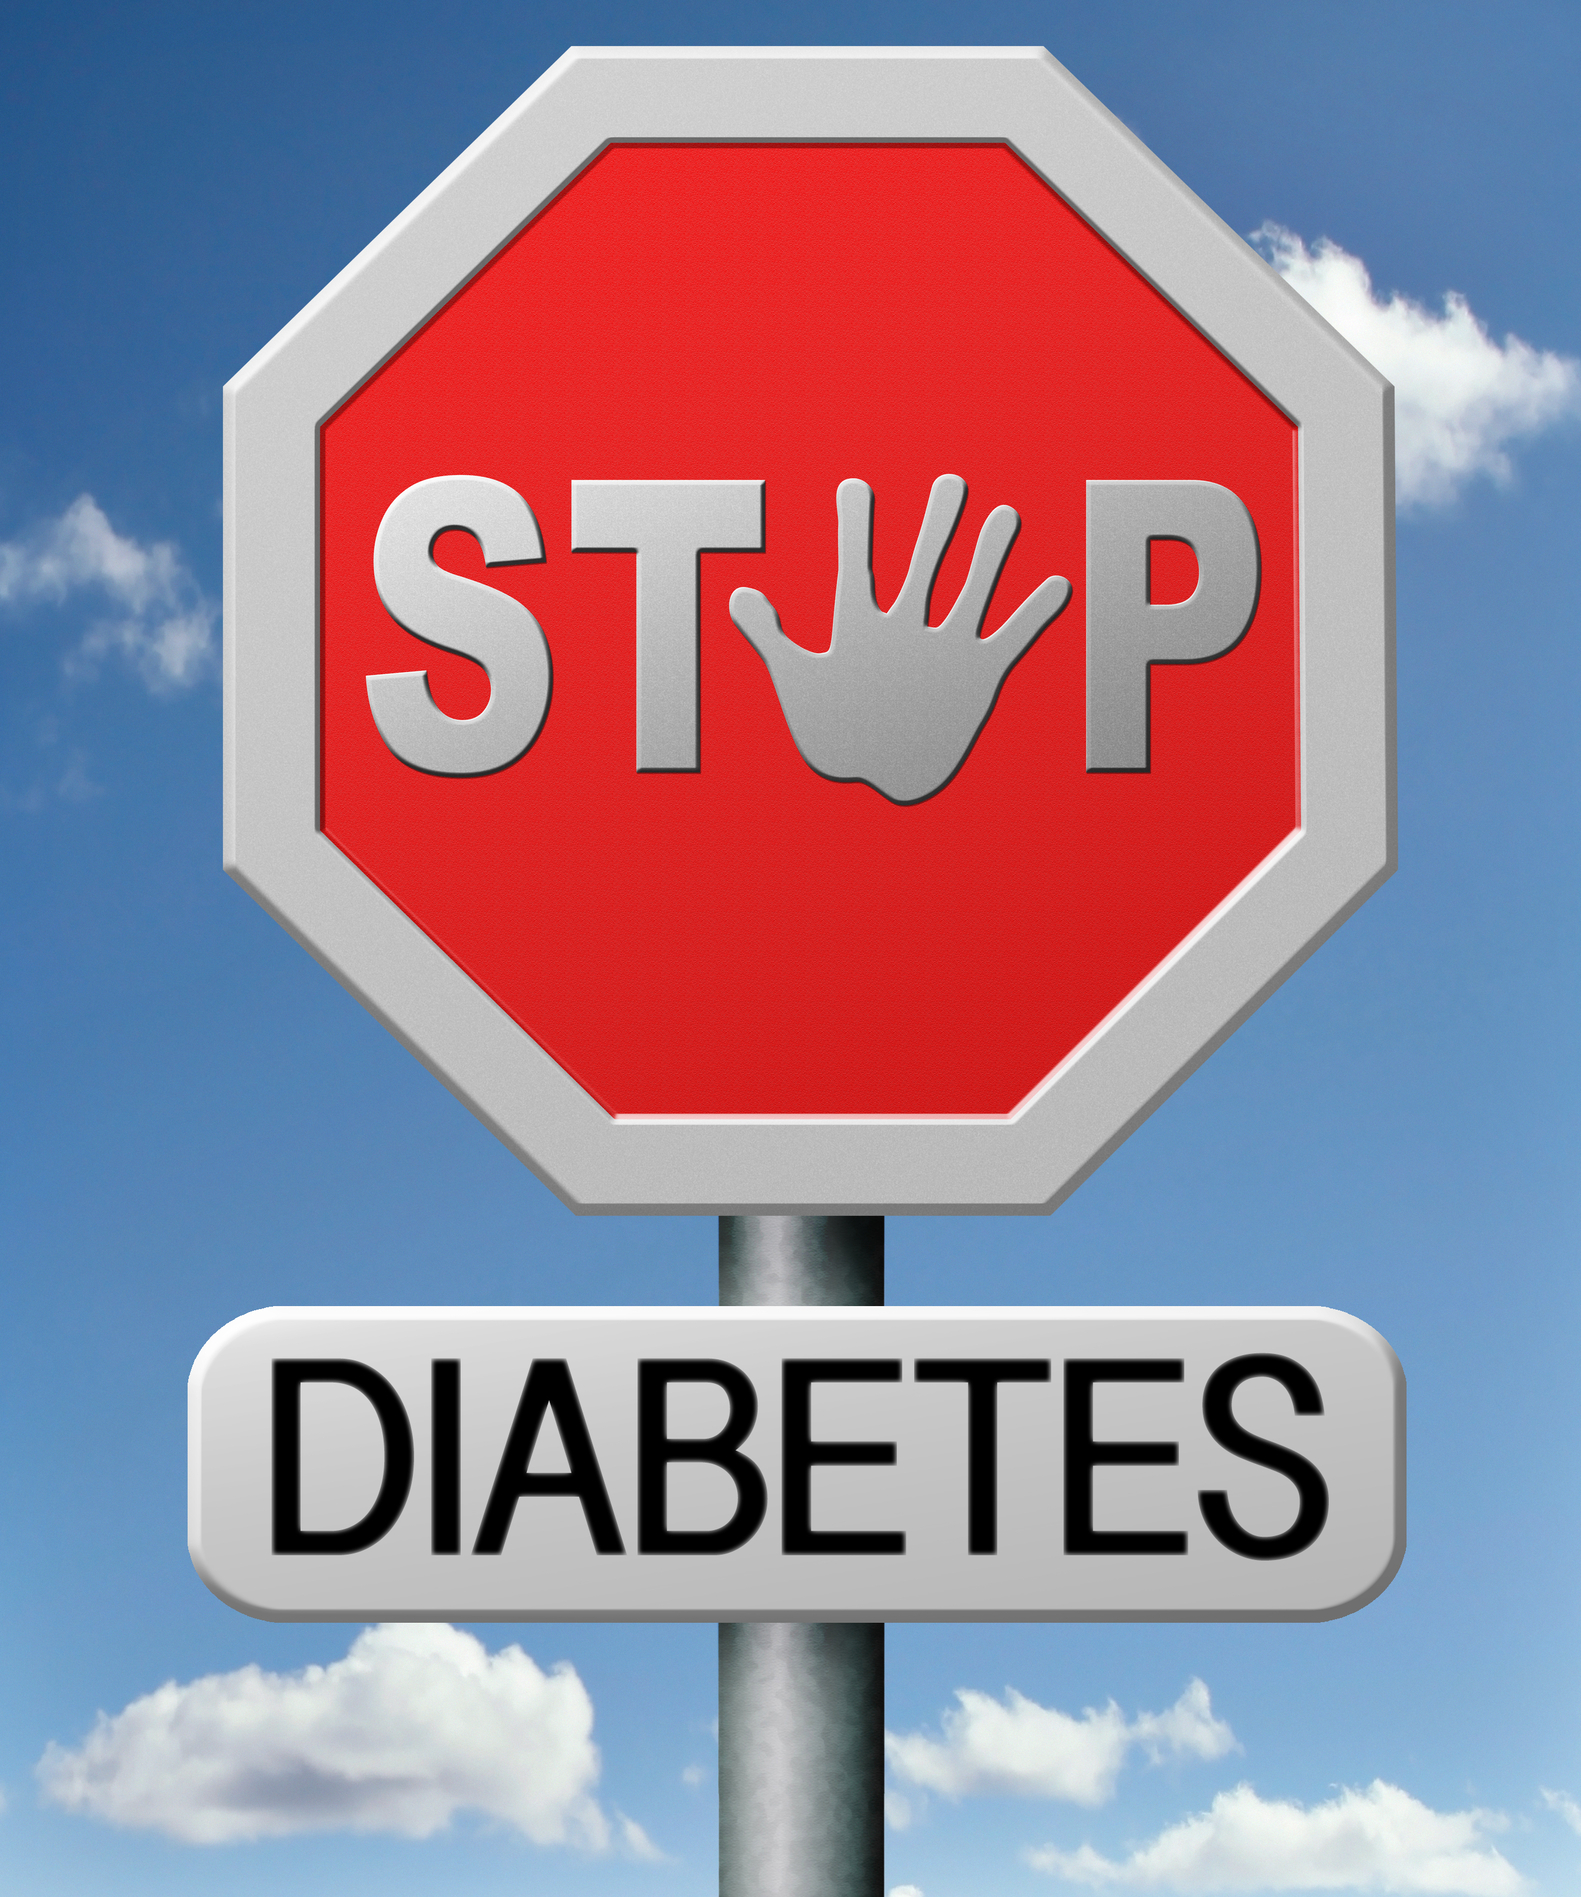 Stop sign that says "stop diabetes"